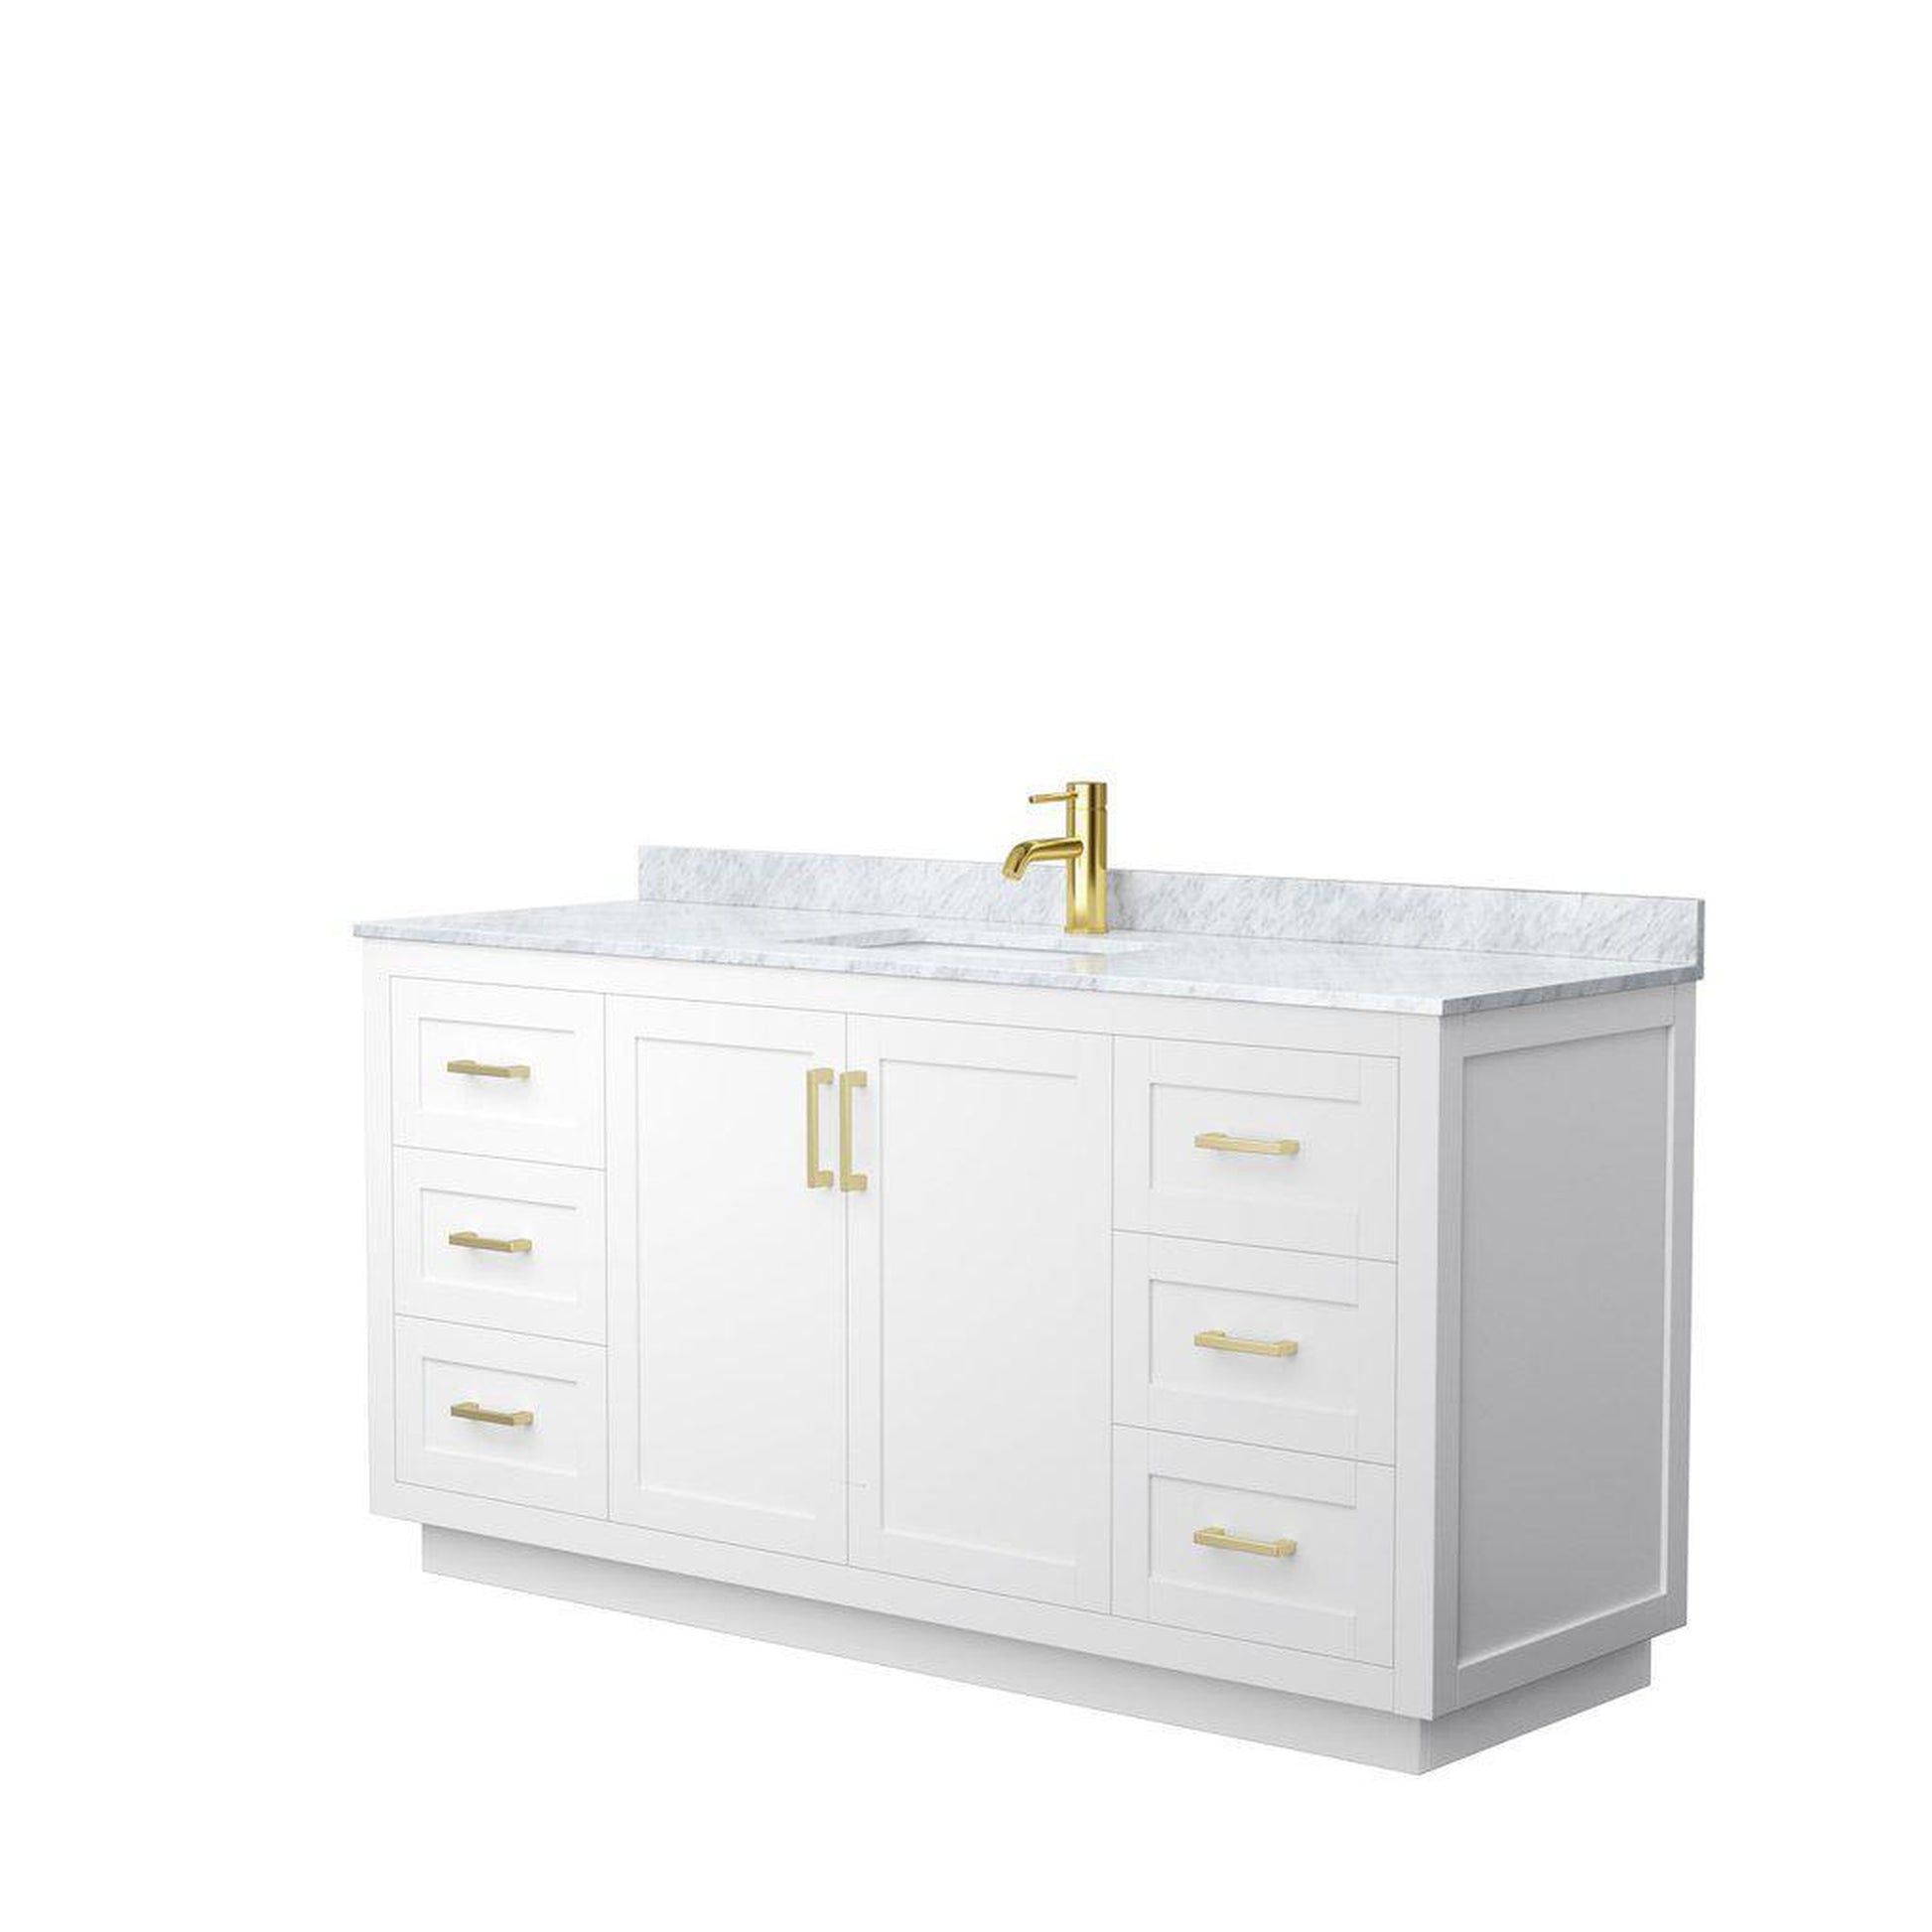 Wyndham Collection Miranda 66" Single Bathroom White Vanity Set With White Carrara Marble Countertop, Undermount Square Sink, And Brushed Gold Trim